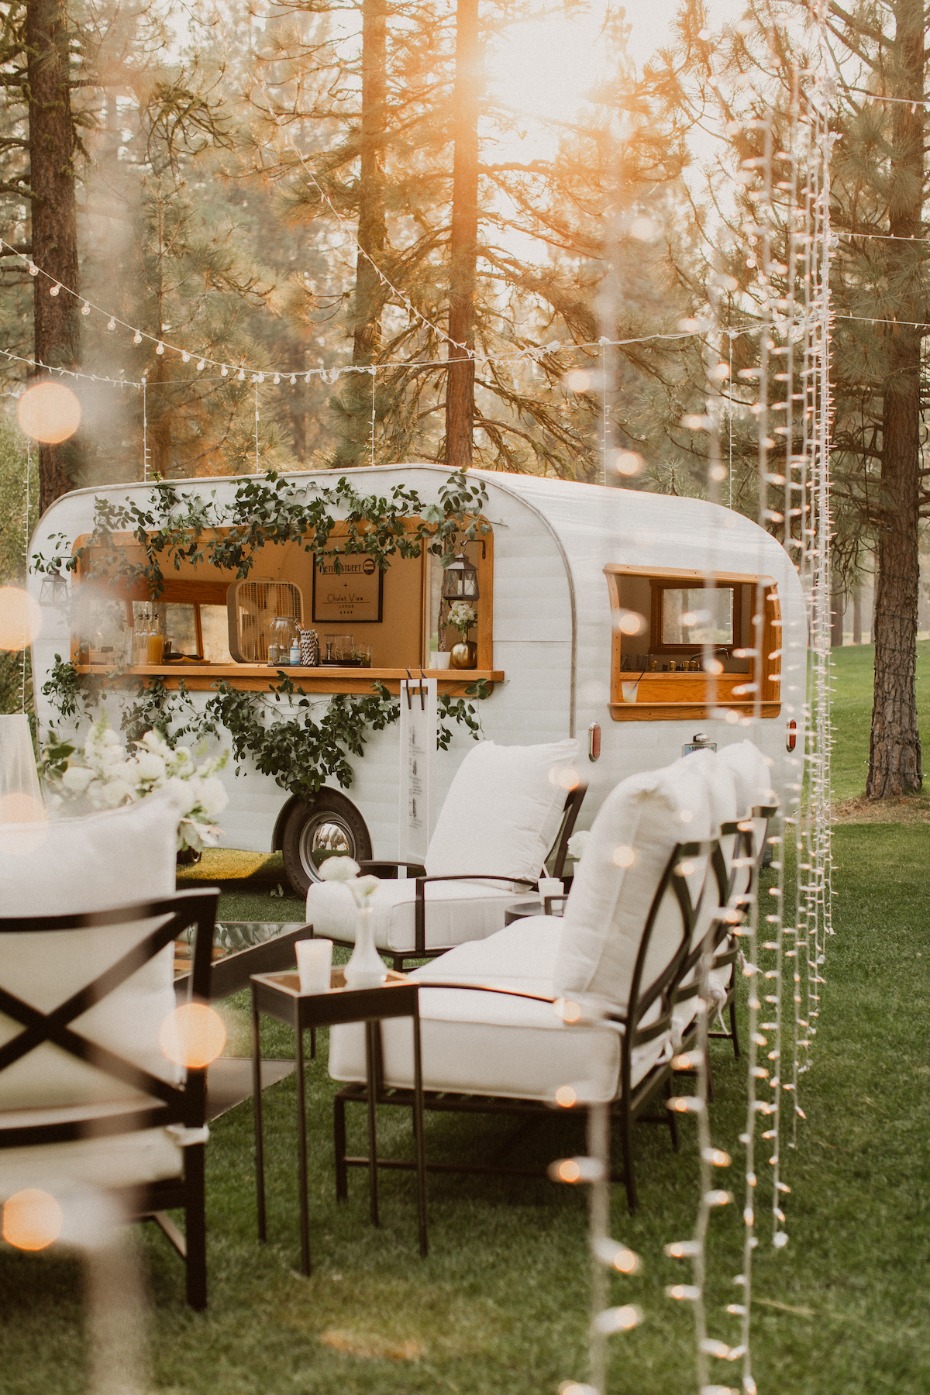 A Destination Wedding In the Woods Is Exactly What You Need Right Now